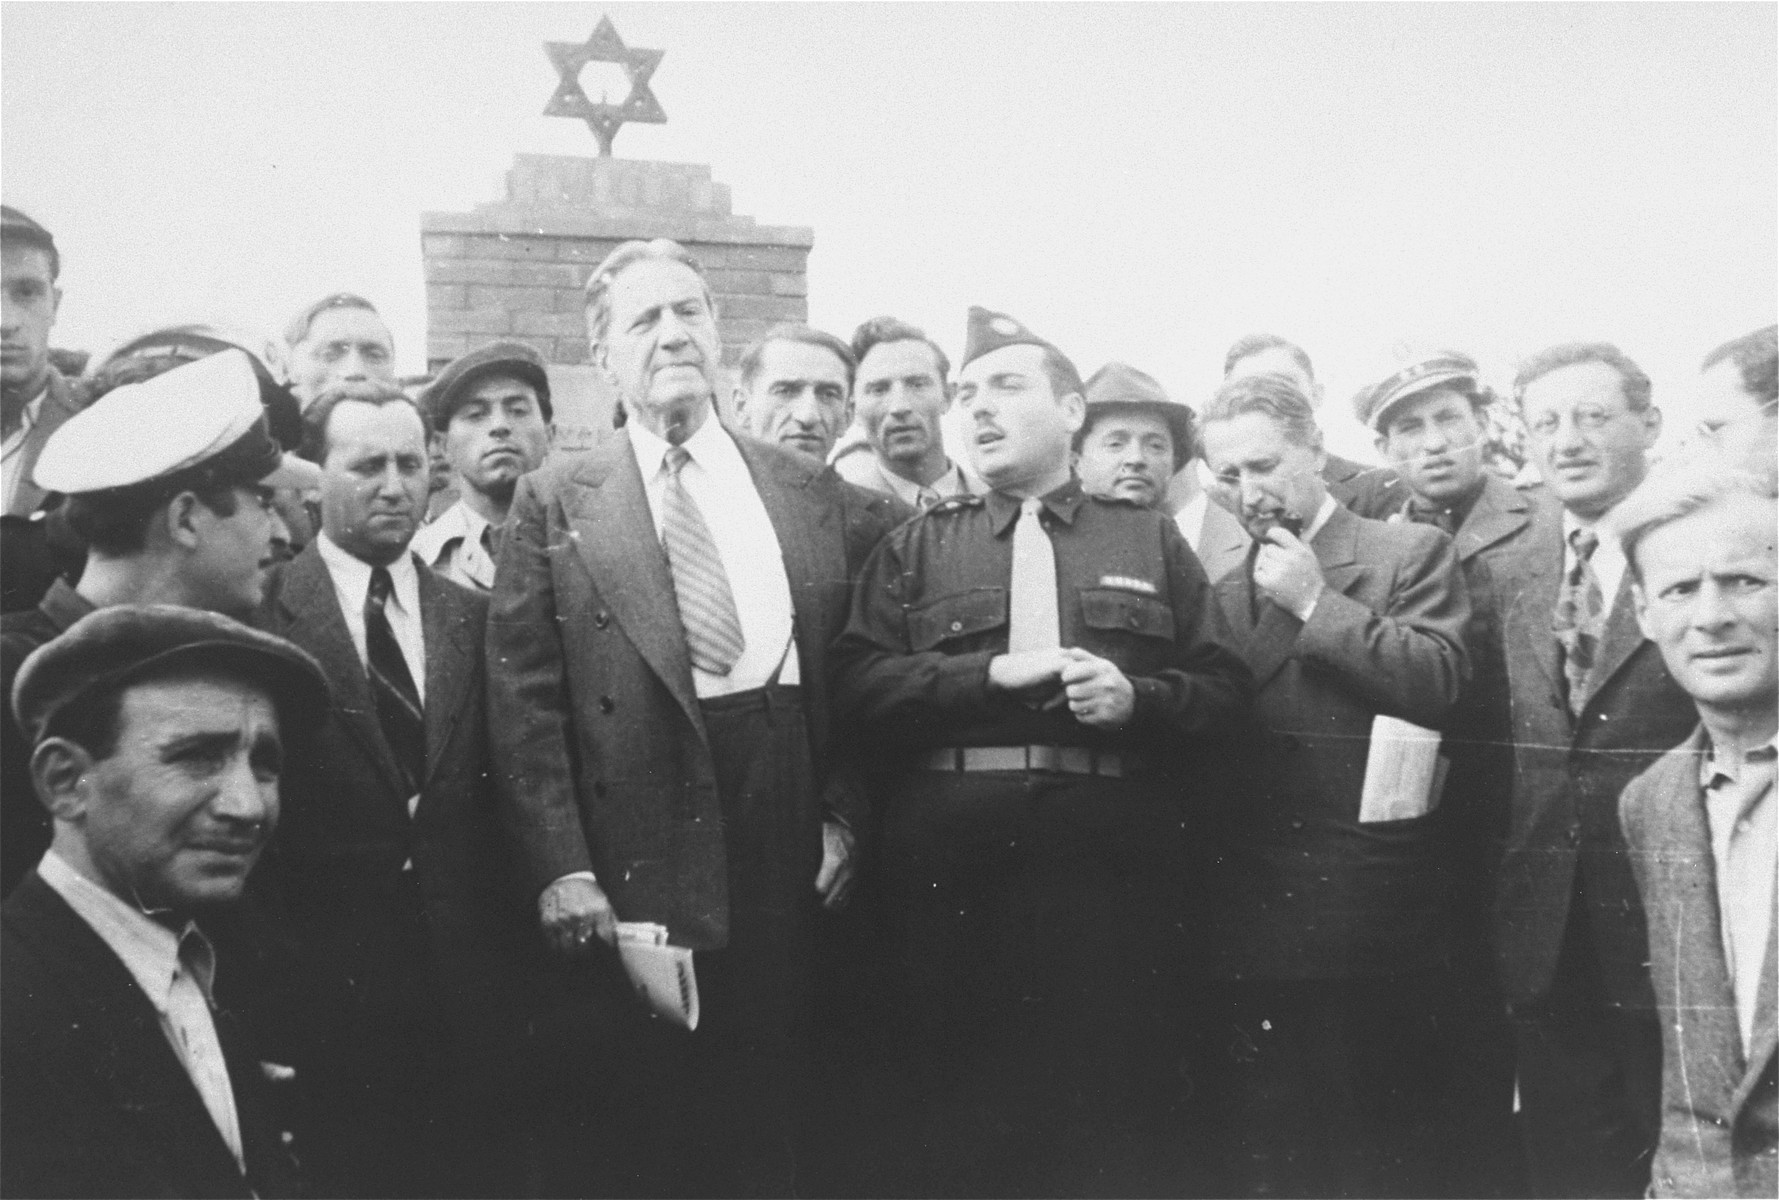 Rabbi Stephen Wise visits the Zeilsheim displaced persons camp. 

Among those pictured is Abe Greenberg (far right, front).